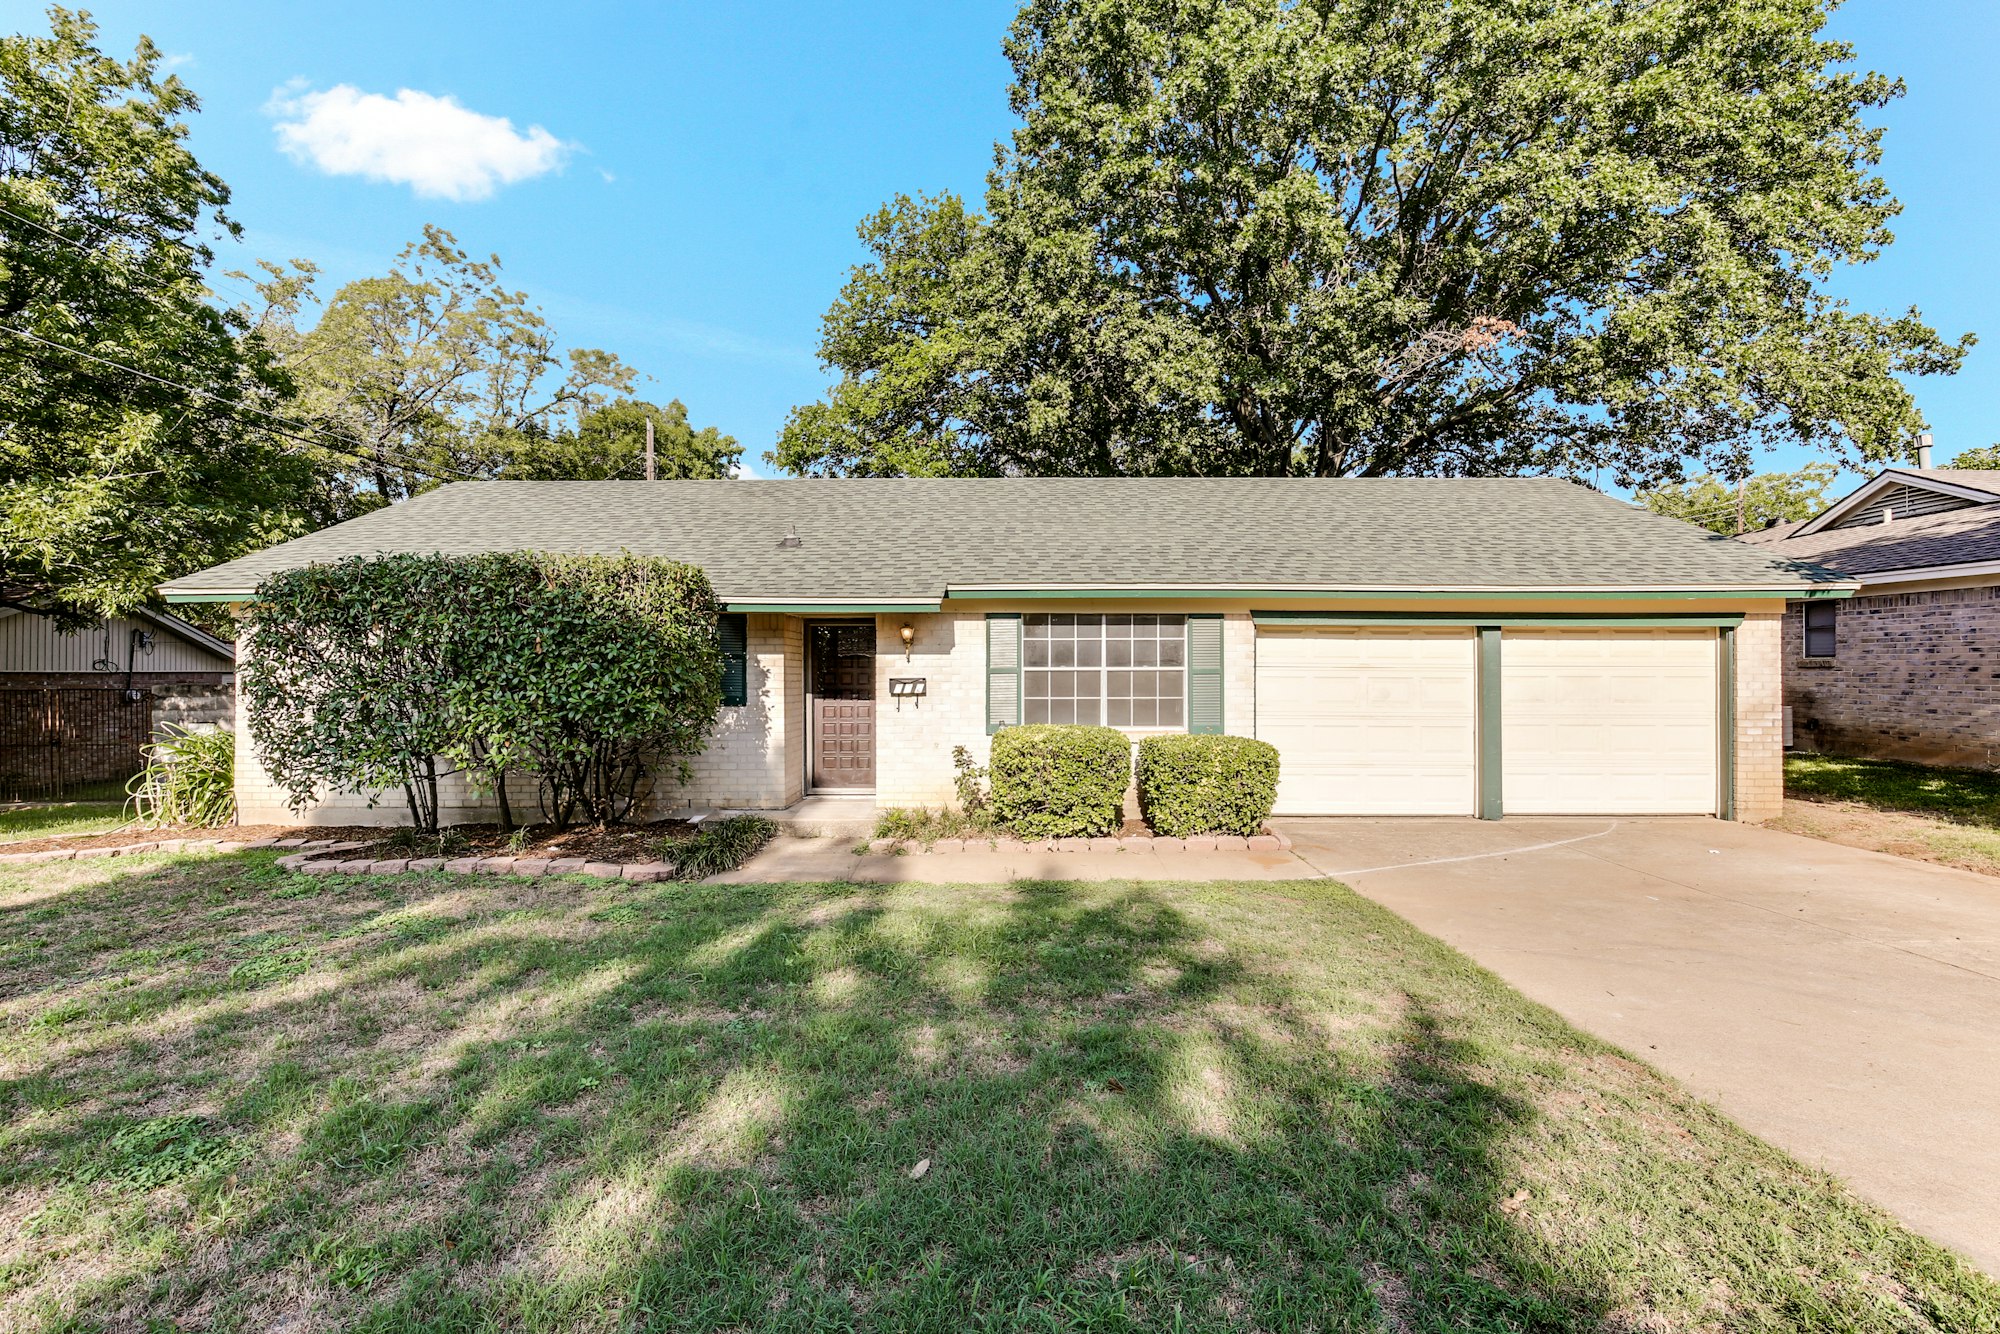 Photo 1 of 16 - 612 Mesa Dr, Euless, TX 76040